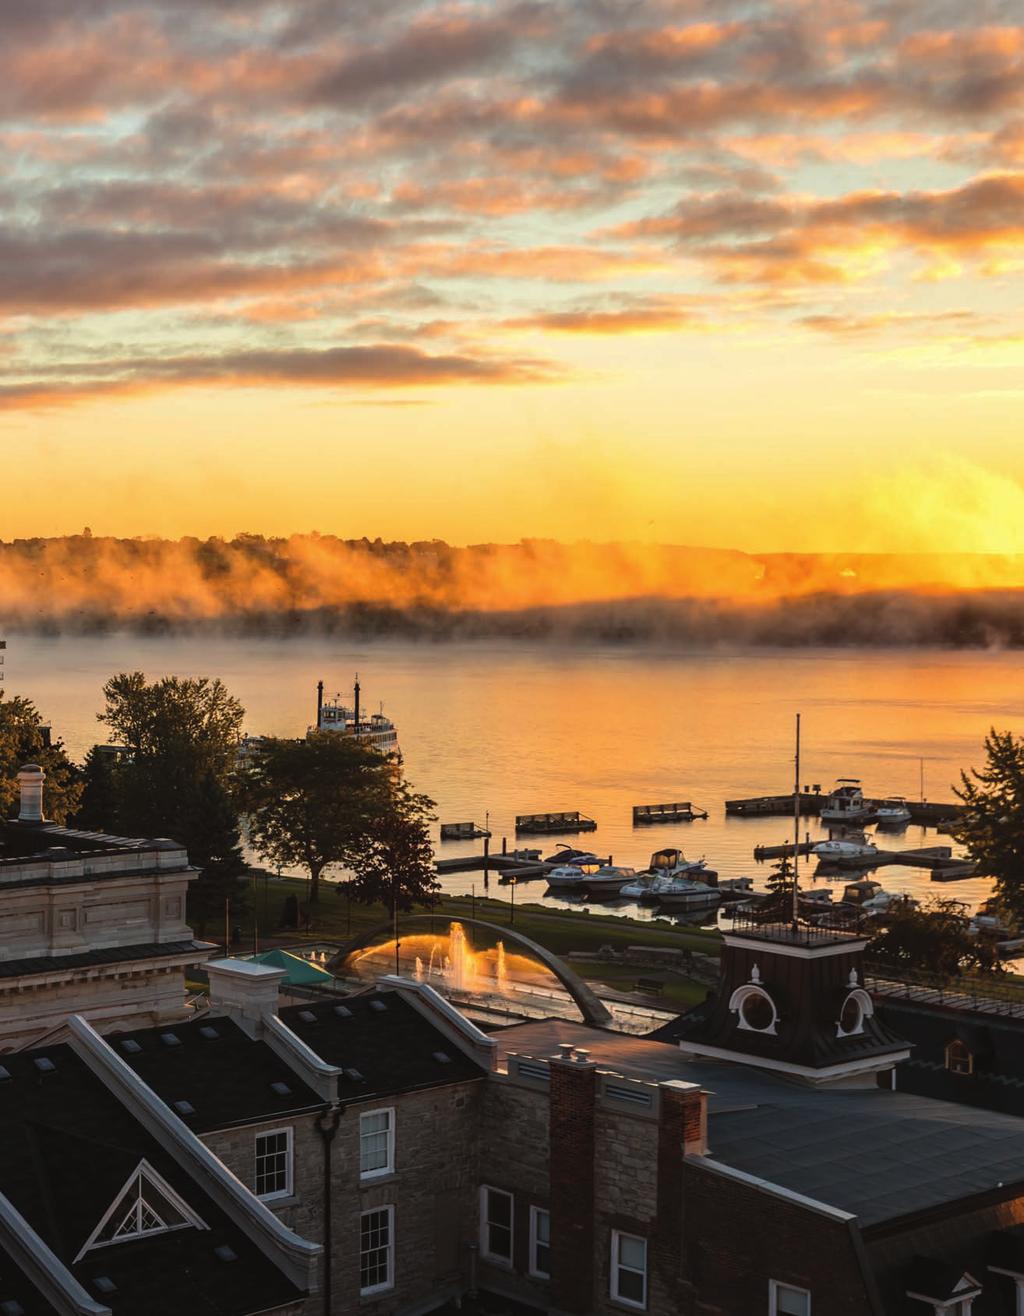 1000 Reasons to Visit Kingston is the gateway to the 1000 Islands, Canada s first capital and one of Ontario s oldest cities with 21 National Historic Sites, 24 Museums and a UNESCO World Heritage